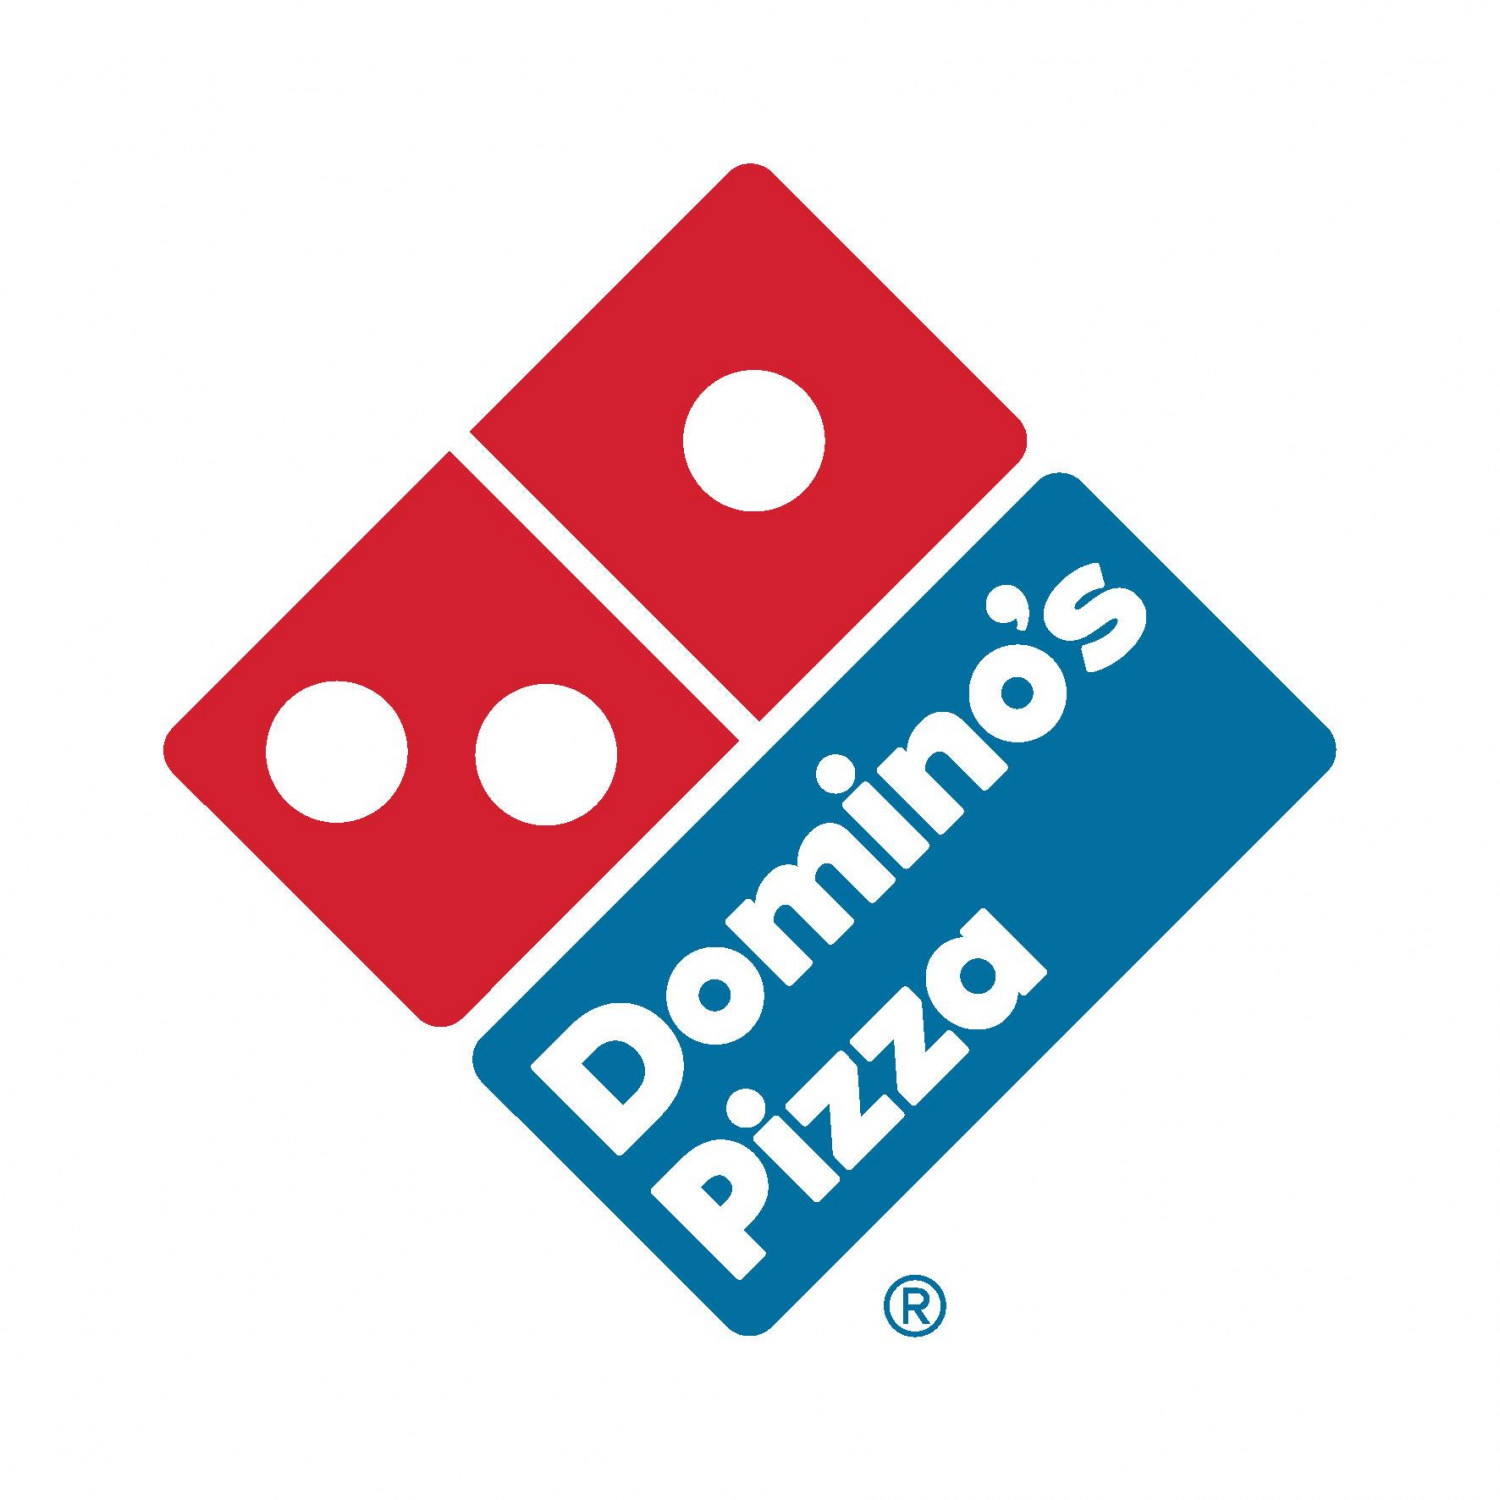 Domino’s Pizza Customer Service Number Infographic